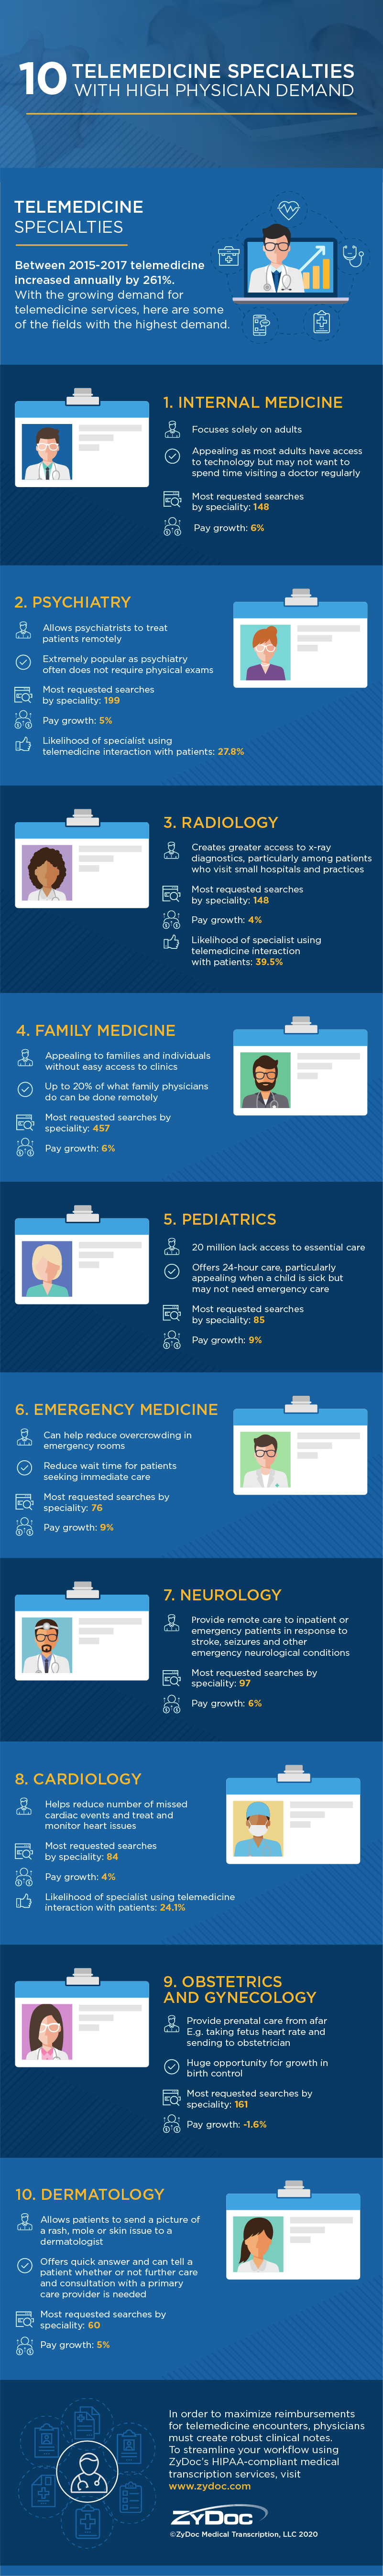 telemedicine specialties with high physician demand